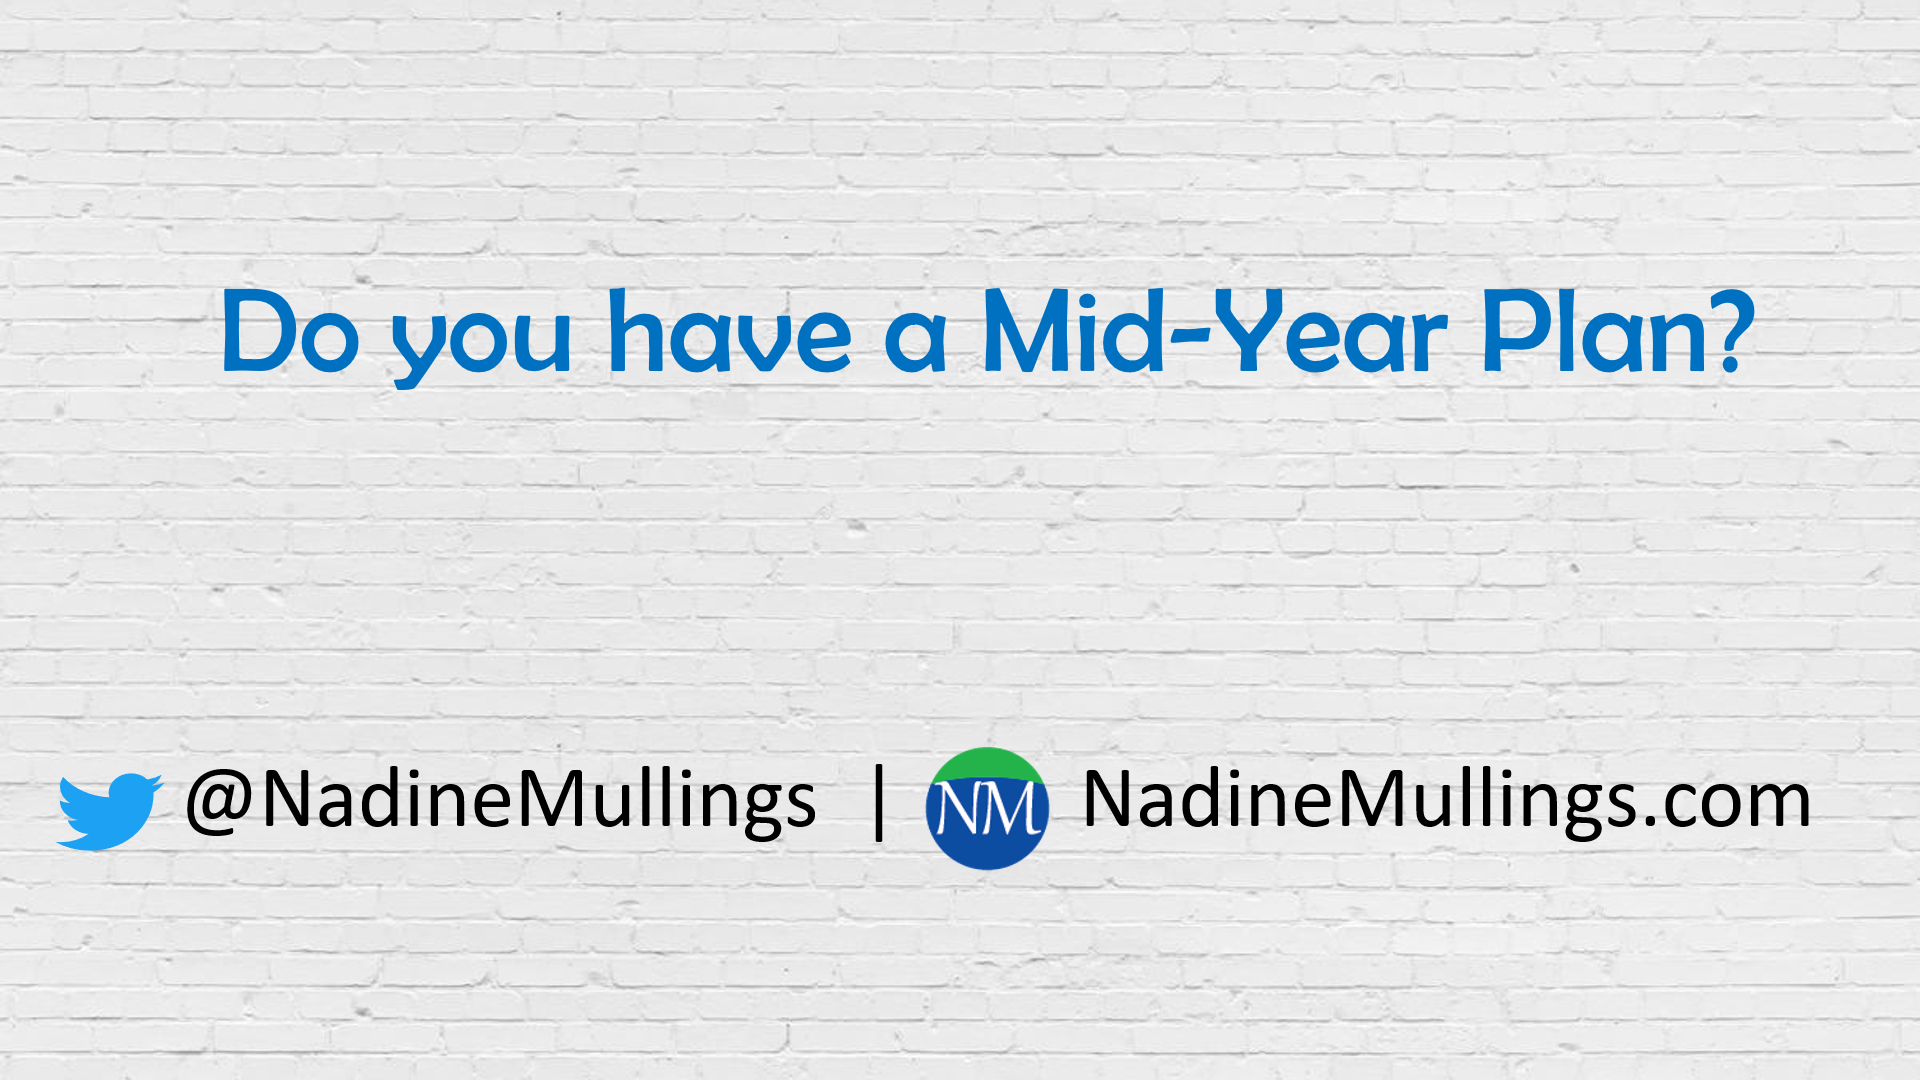 Do you have a Mid-Year Plan